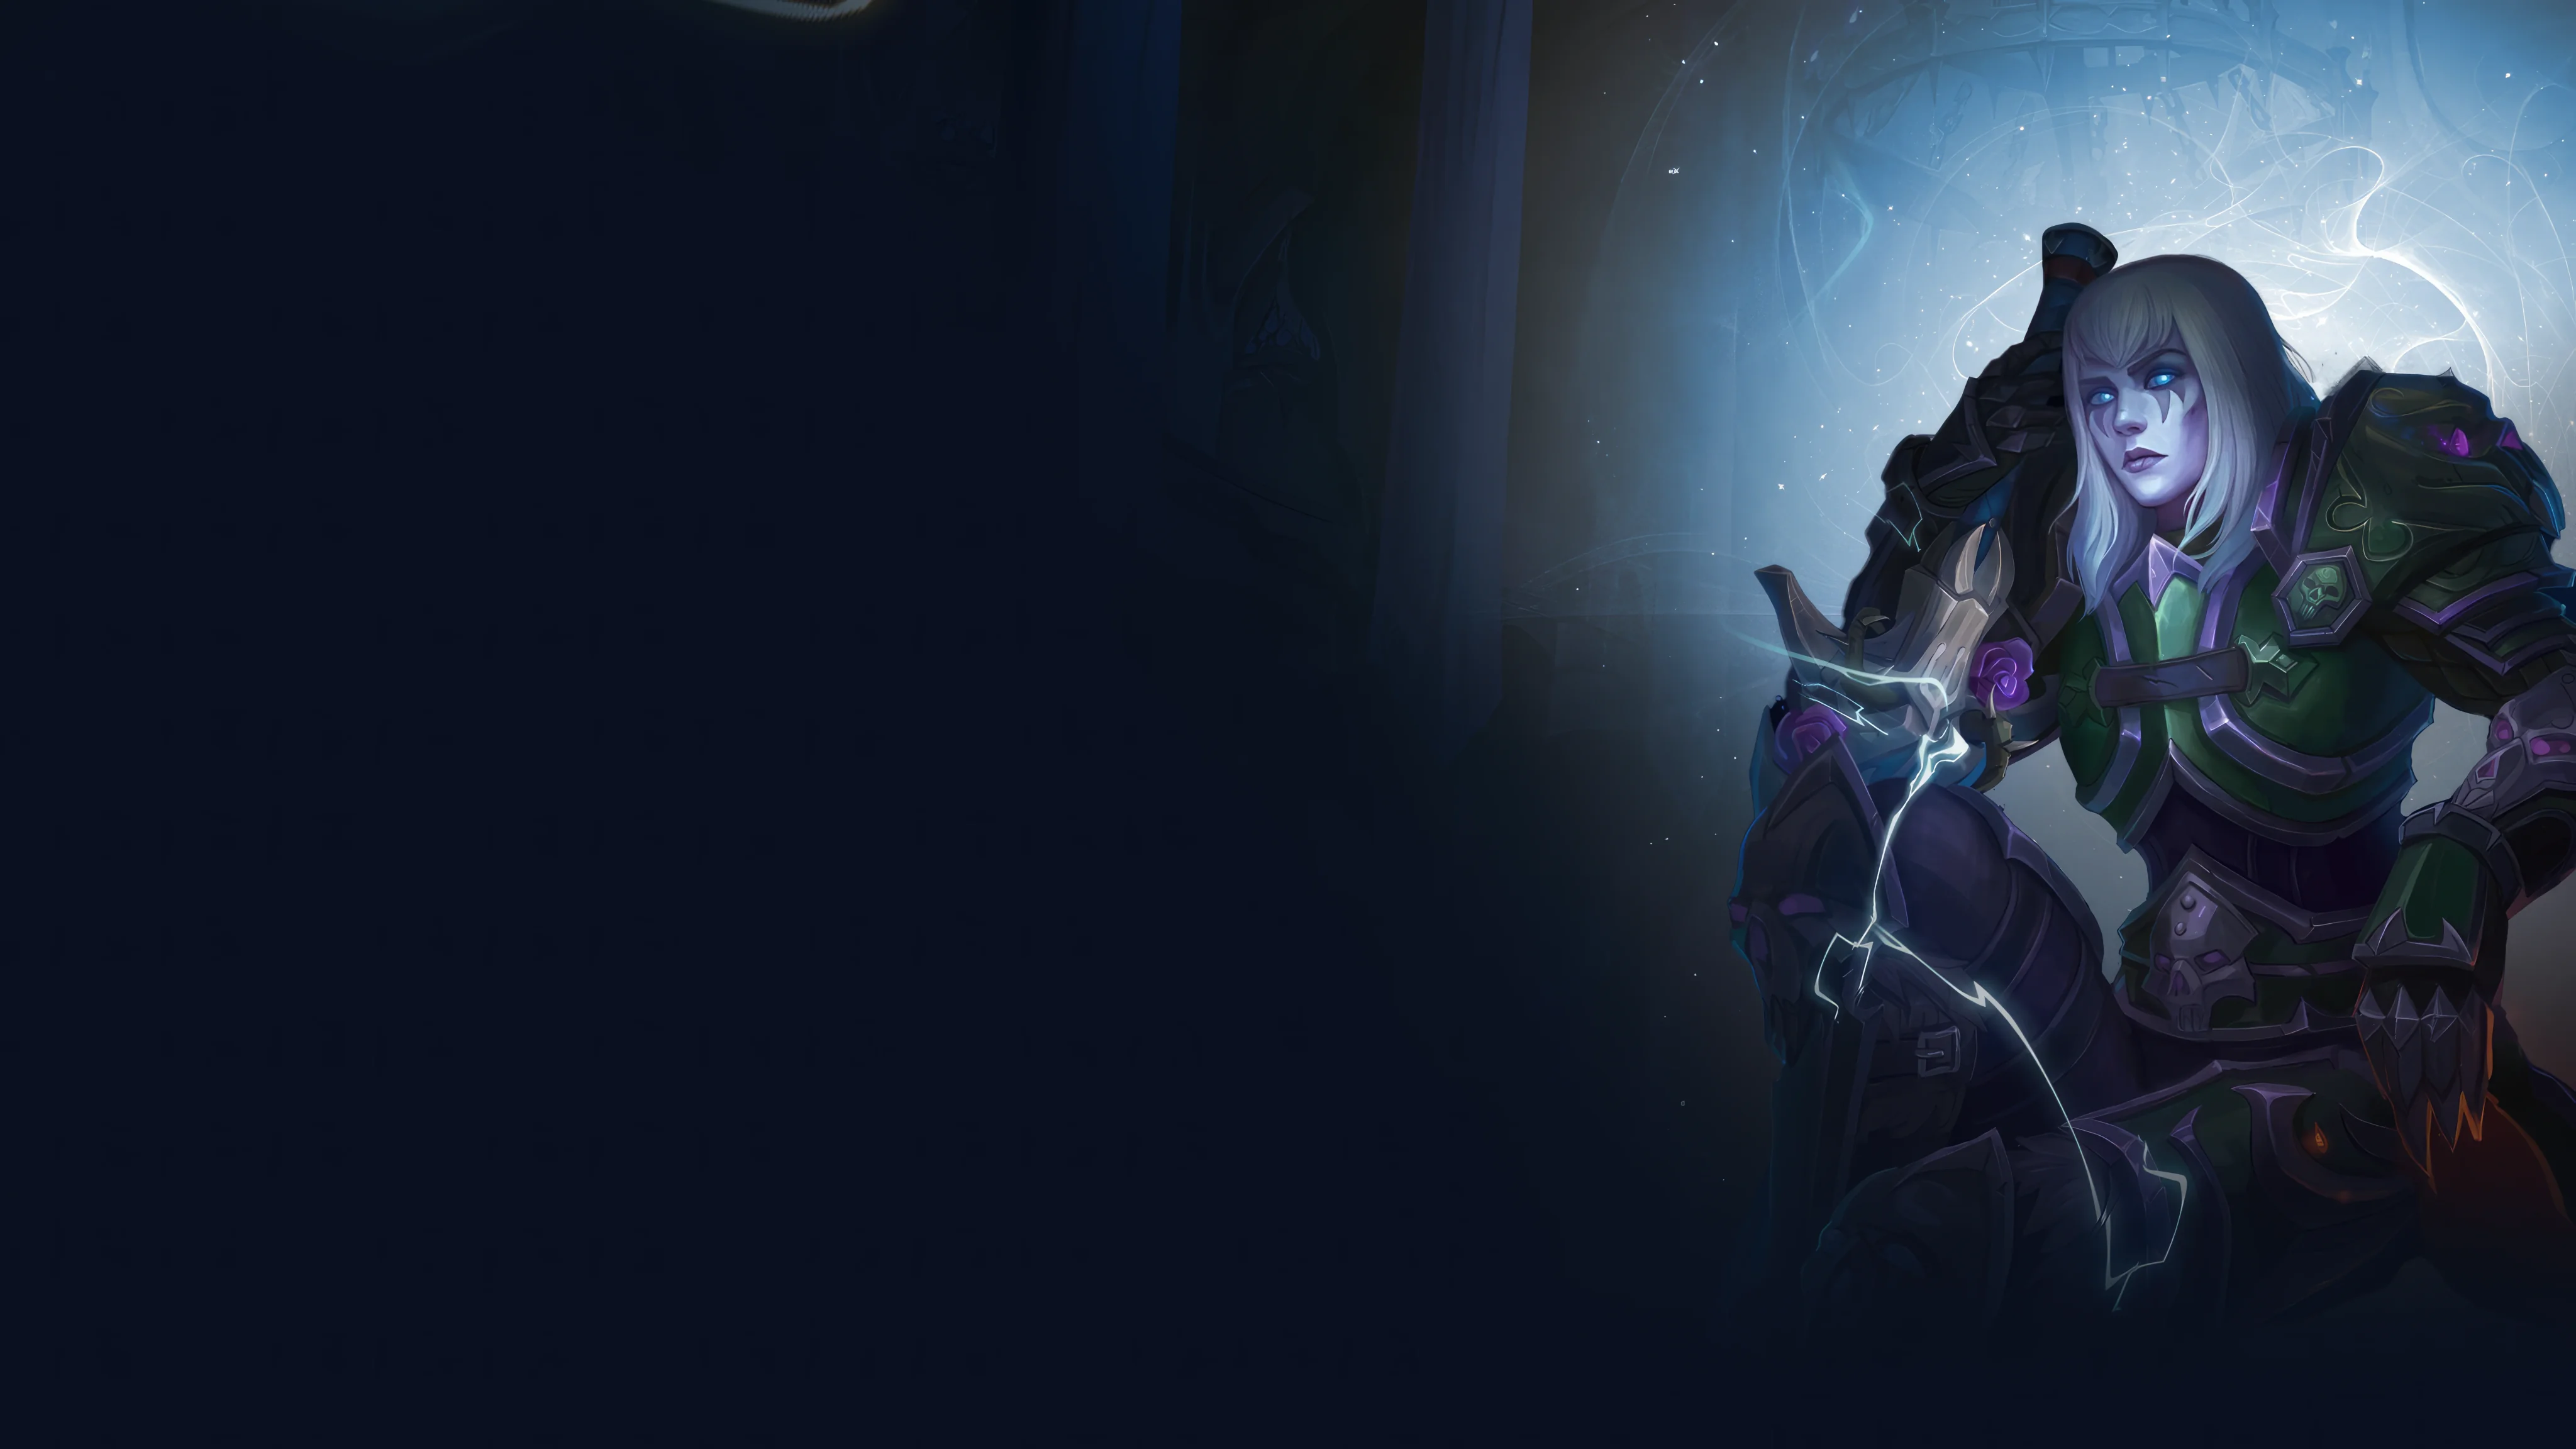 The Lich King beckons on Whitemane's WotLK realm. Unique features, faster leveling, Timewalking raids, and more.